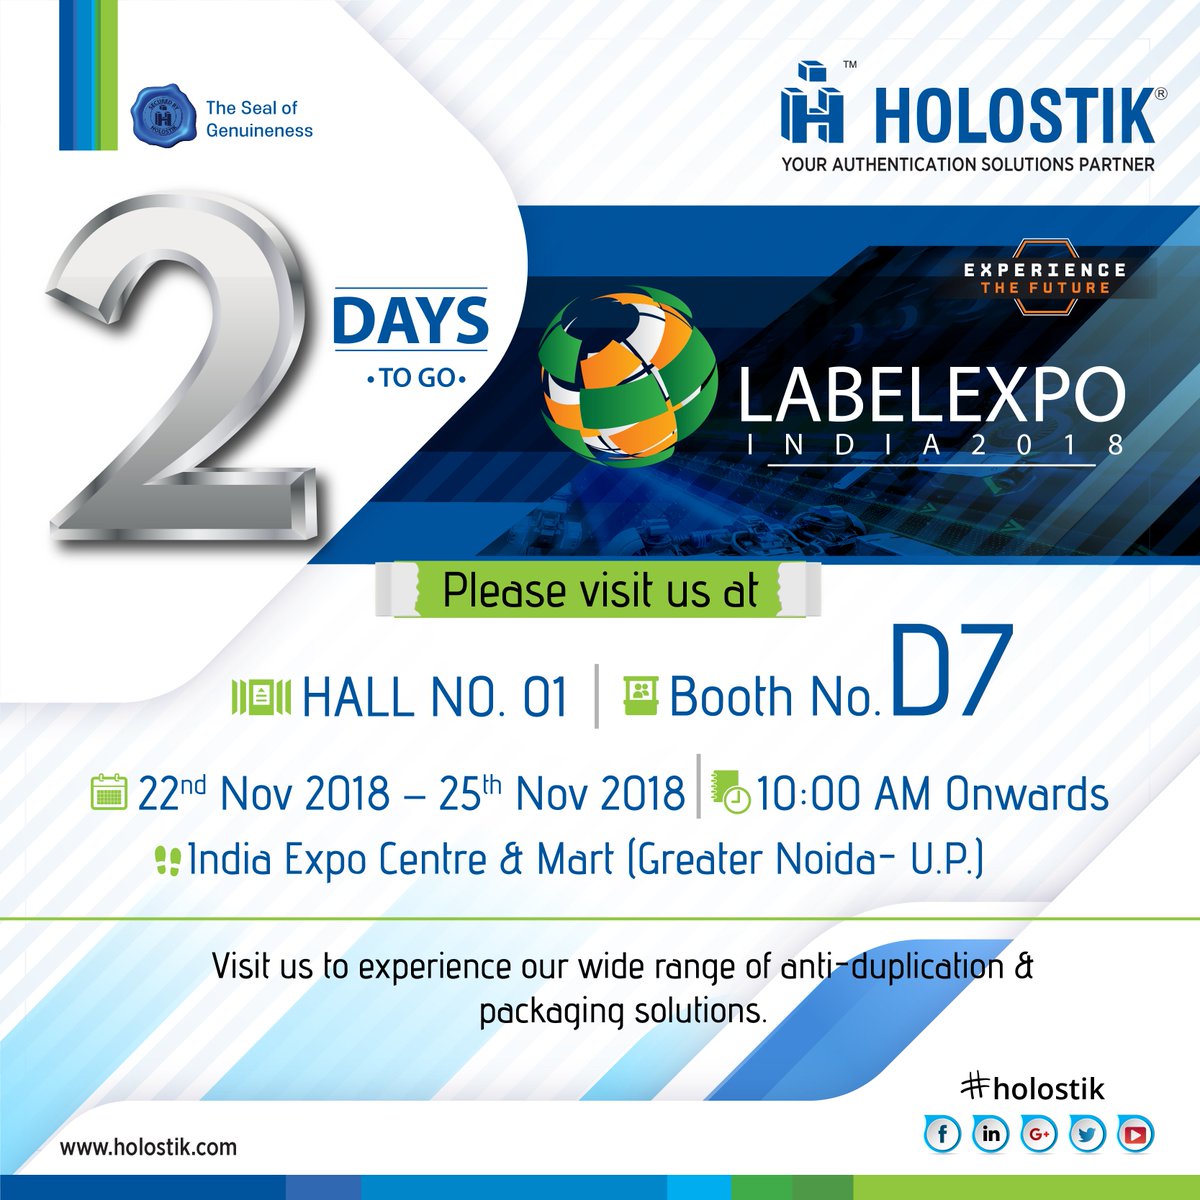 2 DAYS TO GO!

Holostik will display its cutting-edge #antiduplication and #packagingsolutions at #LABELEXPOINDIA 2018 from 22nd Nov to 25th Nov 2018. 

#labels #labelindustry #packagingindustry #Holostik